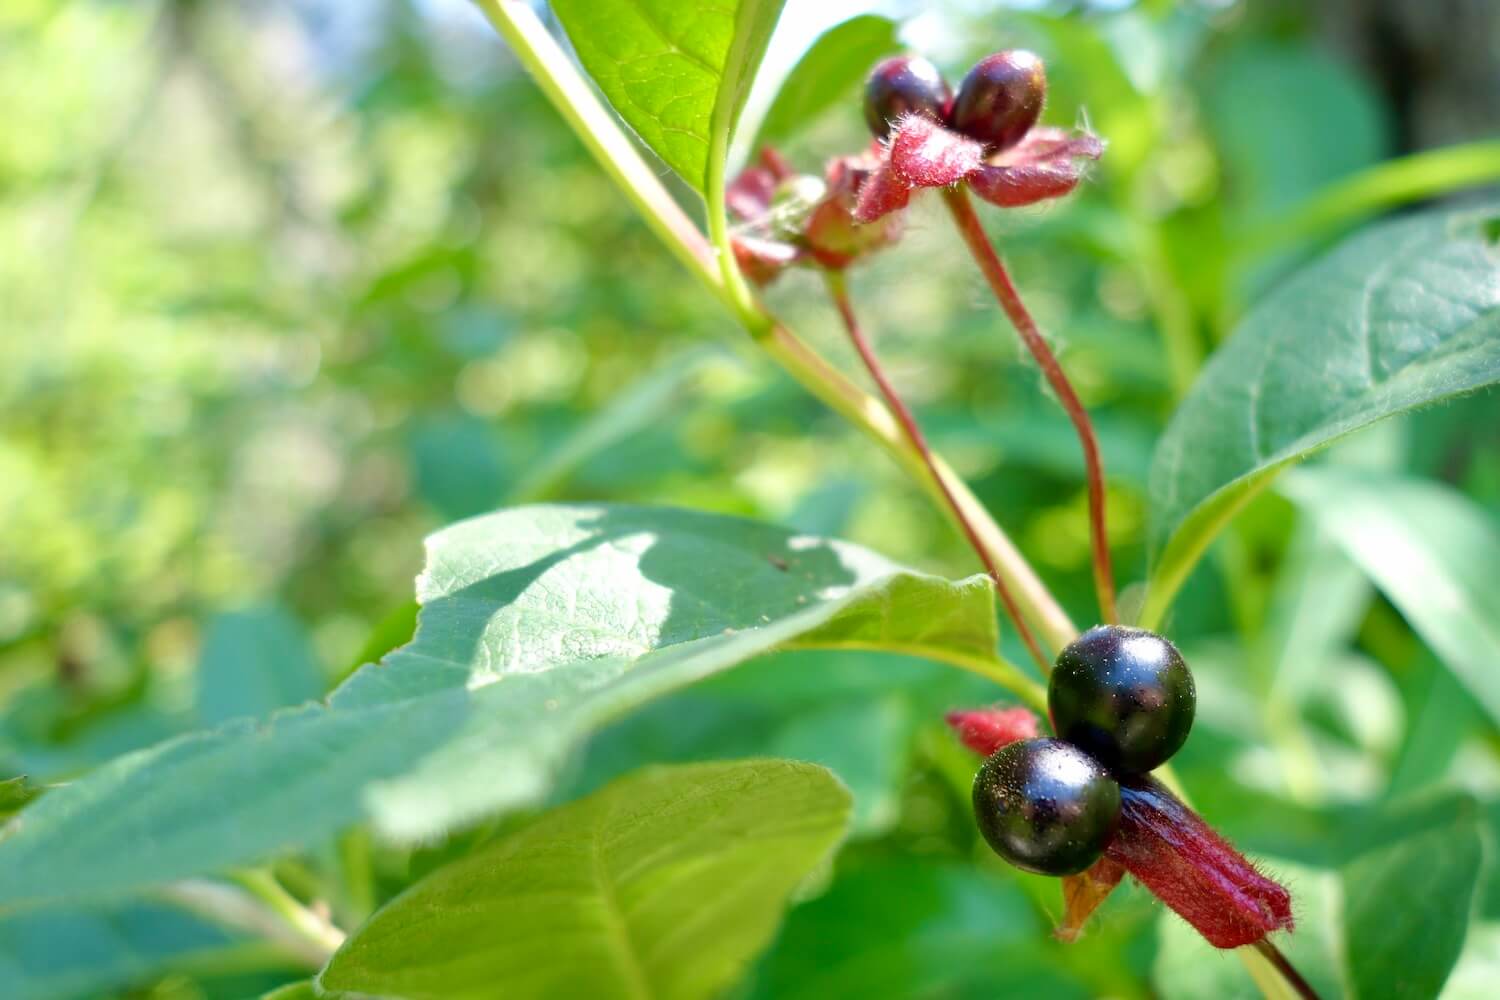 Two dark purple ripe berries cling to a green stalk surrounded by leafs with shadows from the bright sun above.